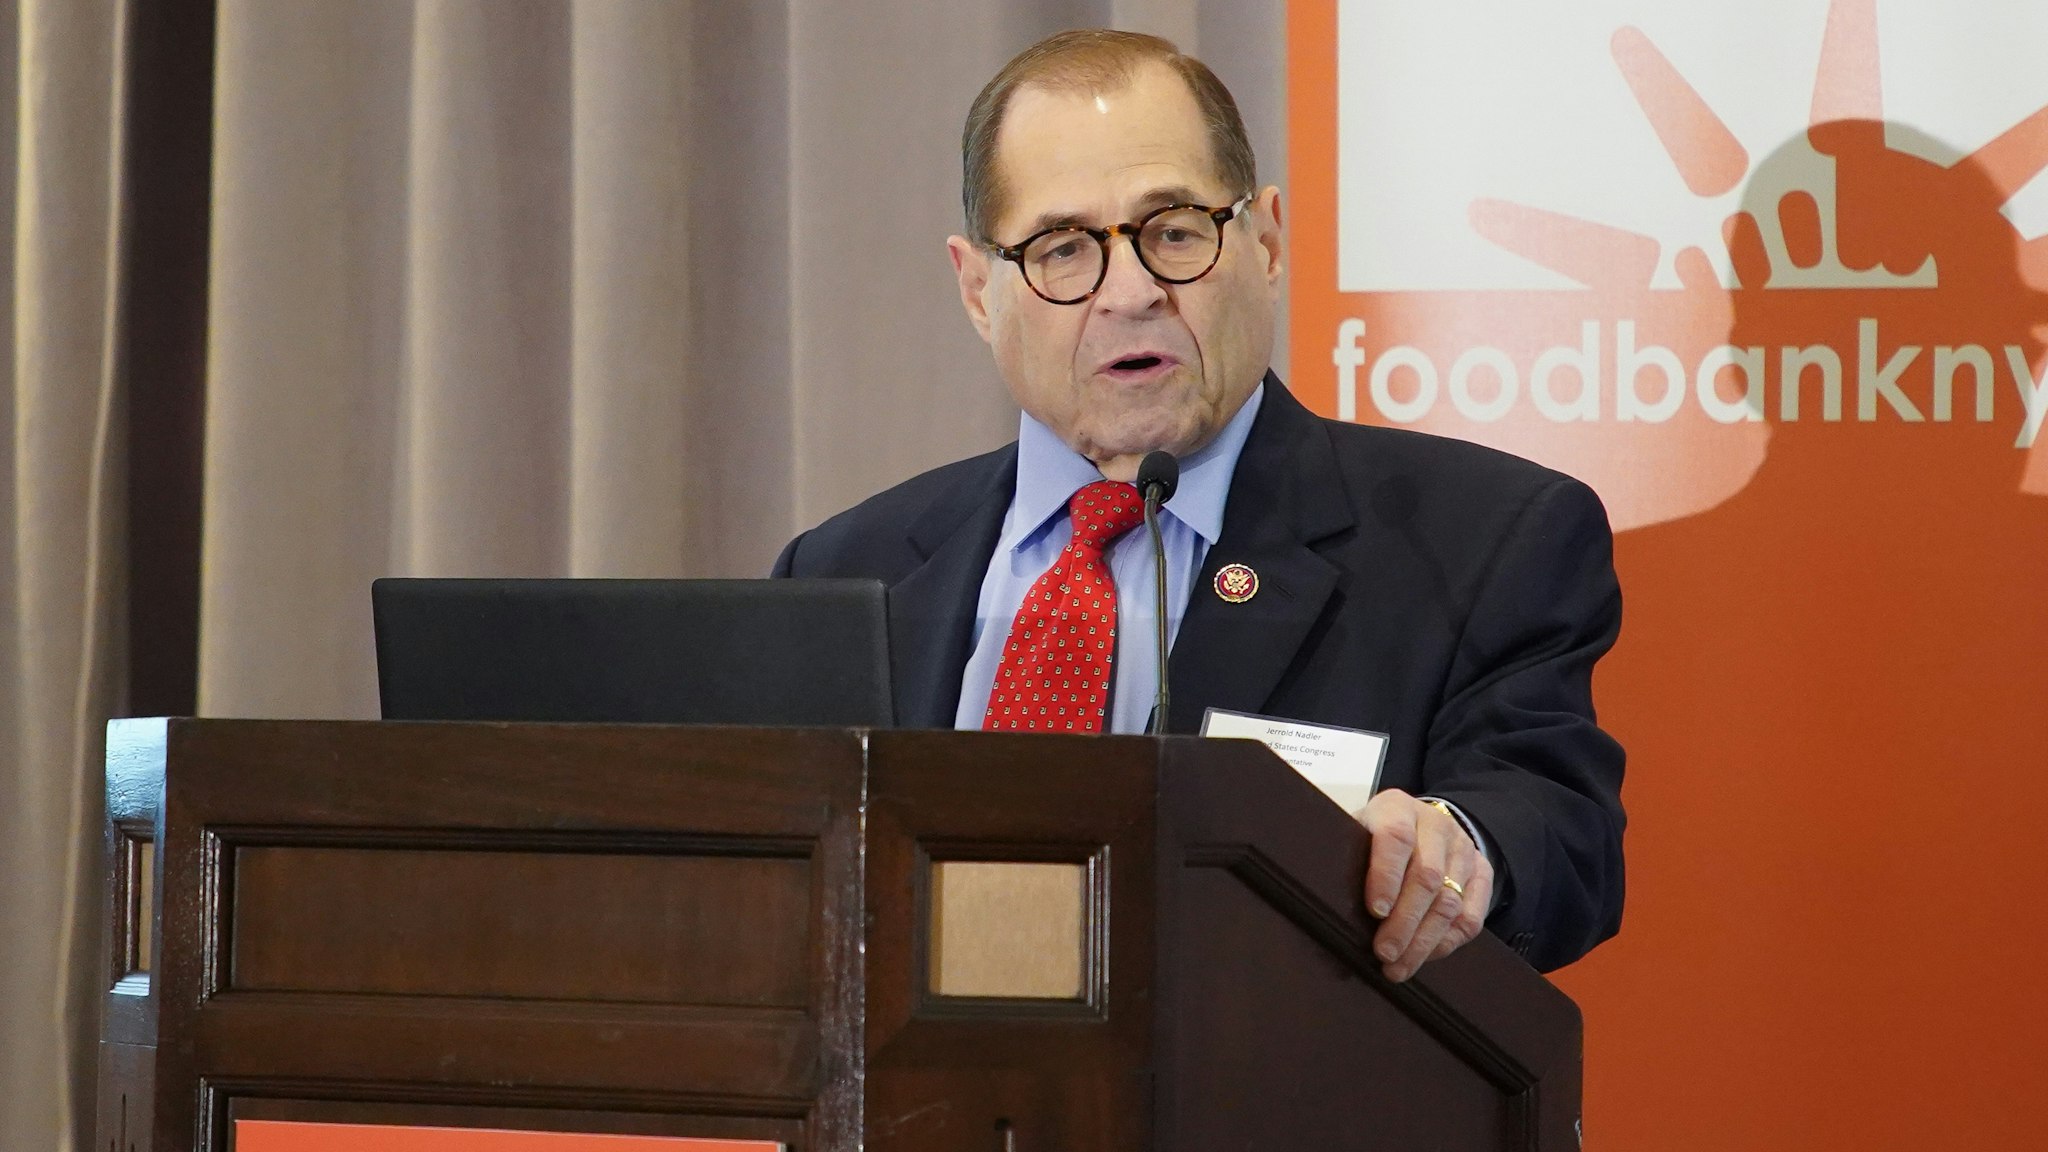 NEW YORK, NEW YORK - NOVEMBER 25: Congress Member Jerry Nadler attends Food Bank For New York City's Annual Legislative Breakfast: Advancing Hunger And Poverty Solutions at Intercontinental New York Barclay on November 25, 2019 in New York City. (Photo by Rob Kim/Getty Images for Food Bank For New York City)